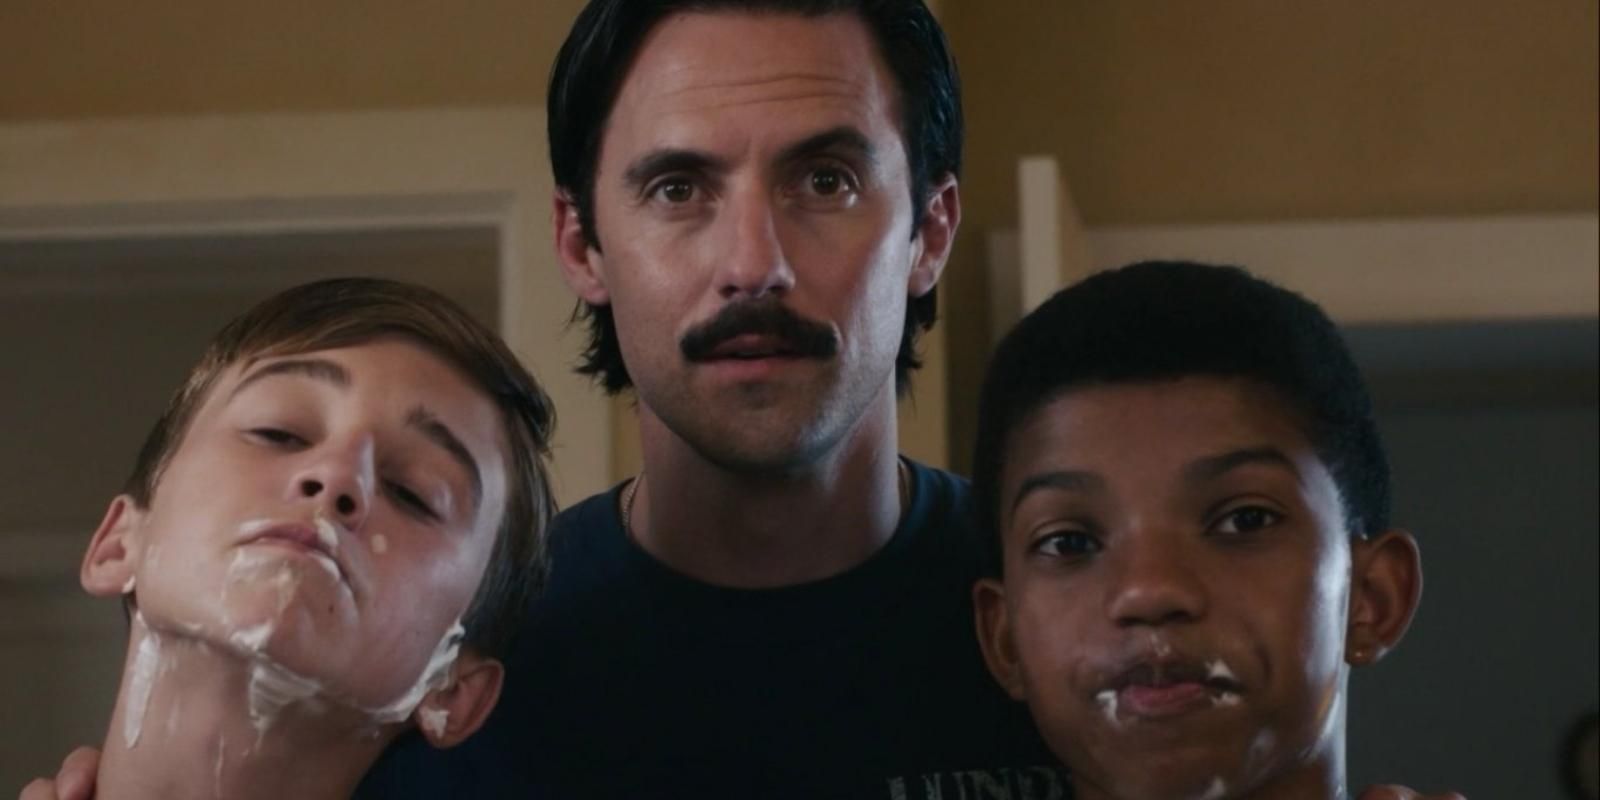 Jack Pearson watches Kevin and Randall shave in This Is Us